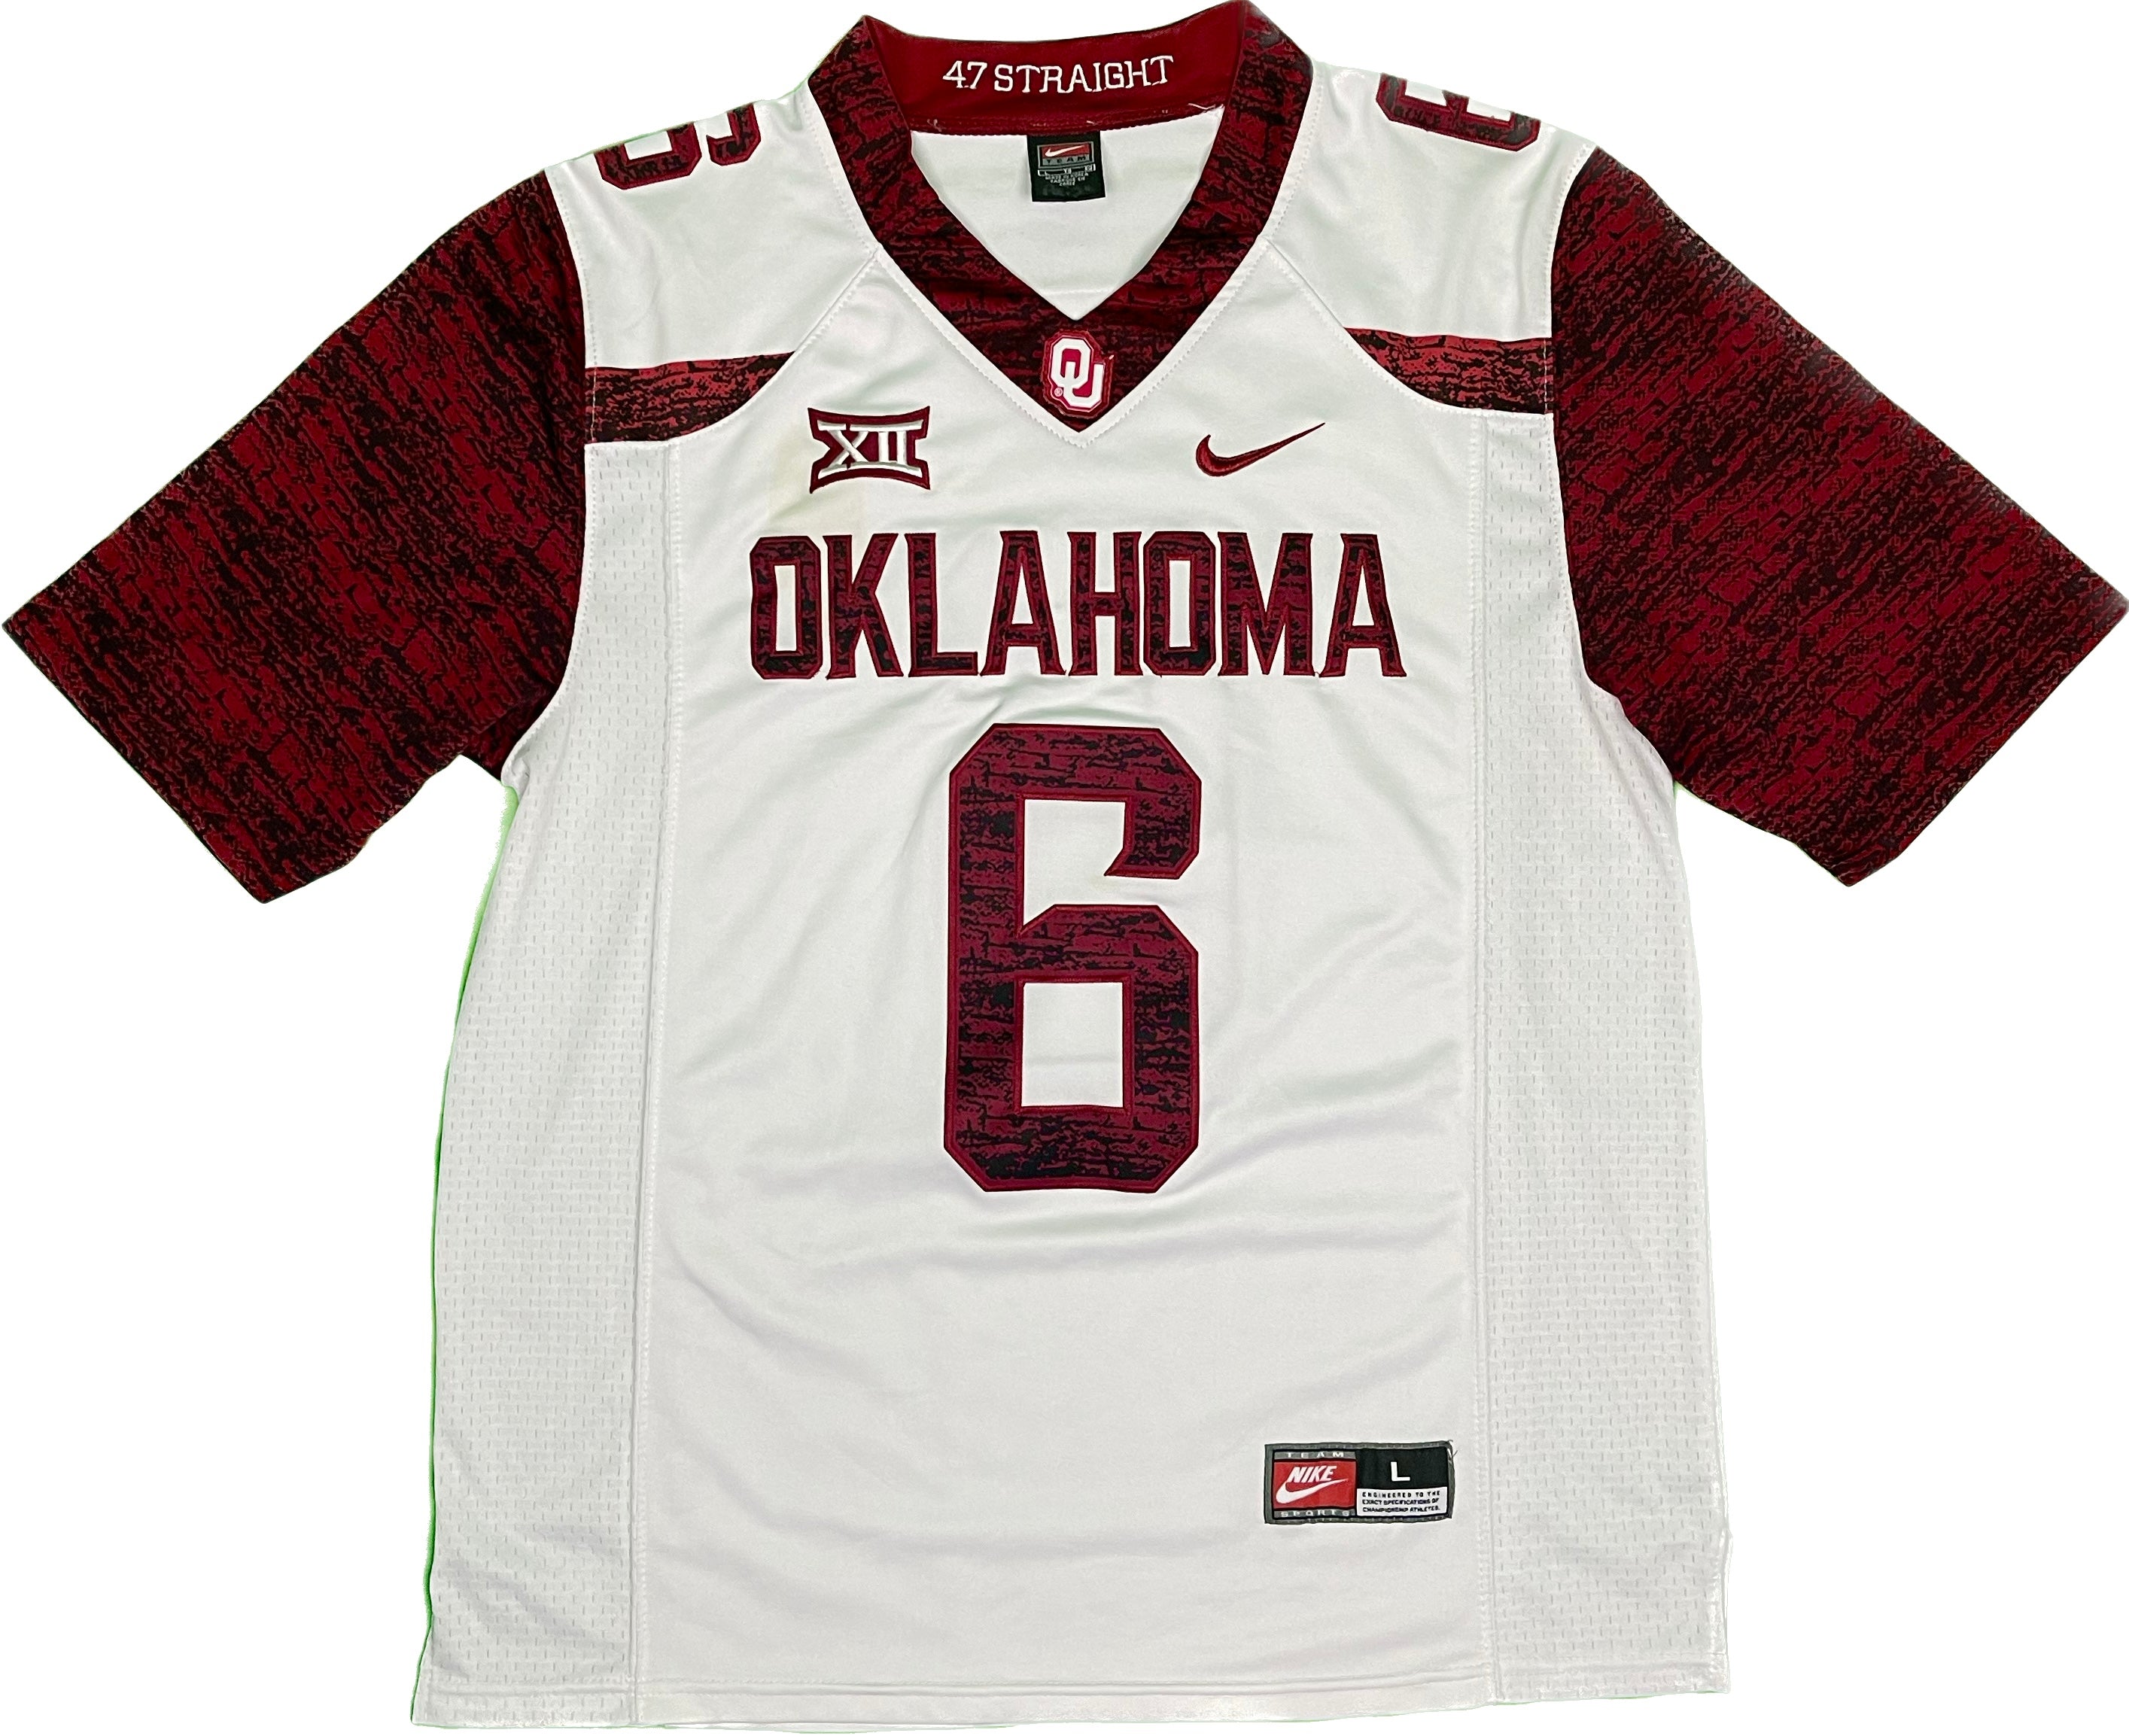 Oklahoma Sooner Mayfield College Jersey